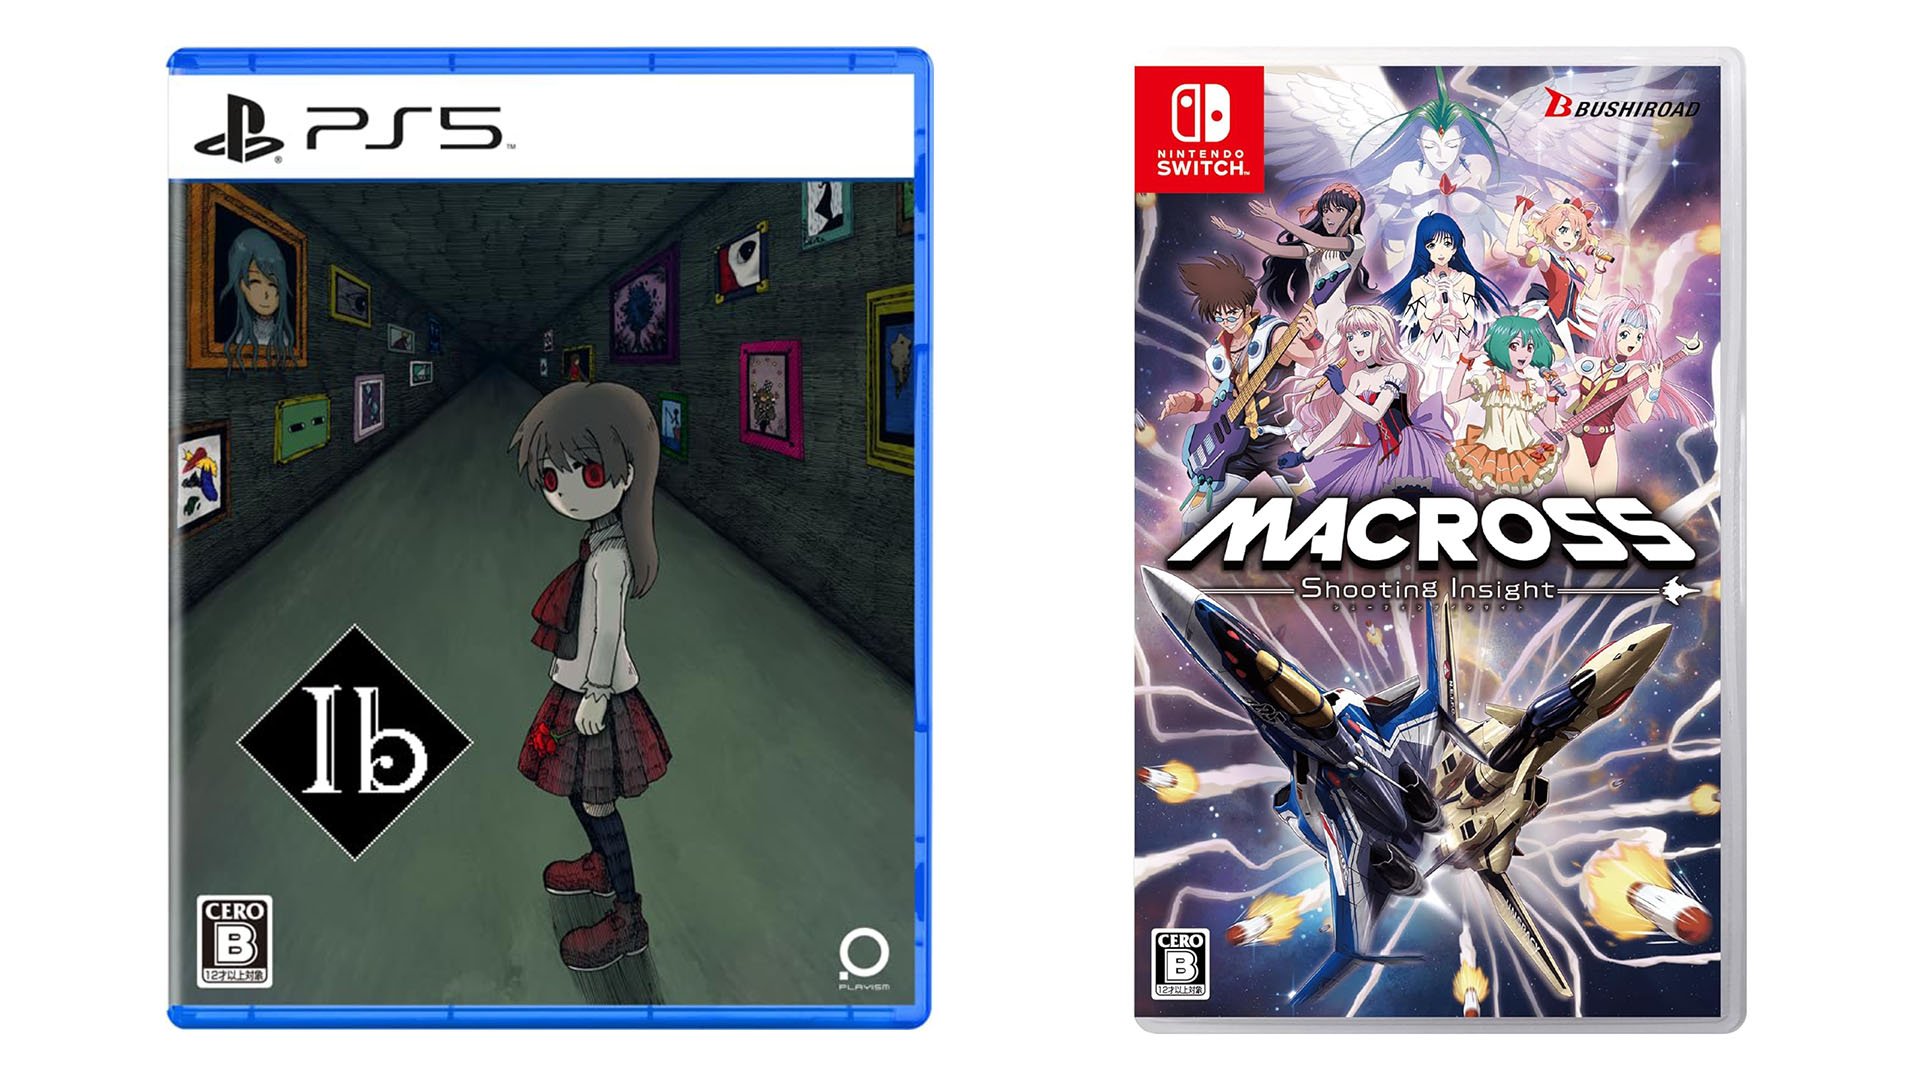 This Week’s Japanese Game Releases Ib for PS5 and PS4, MACROSS